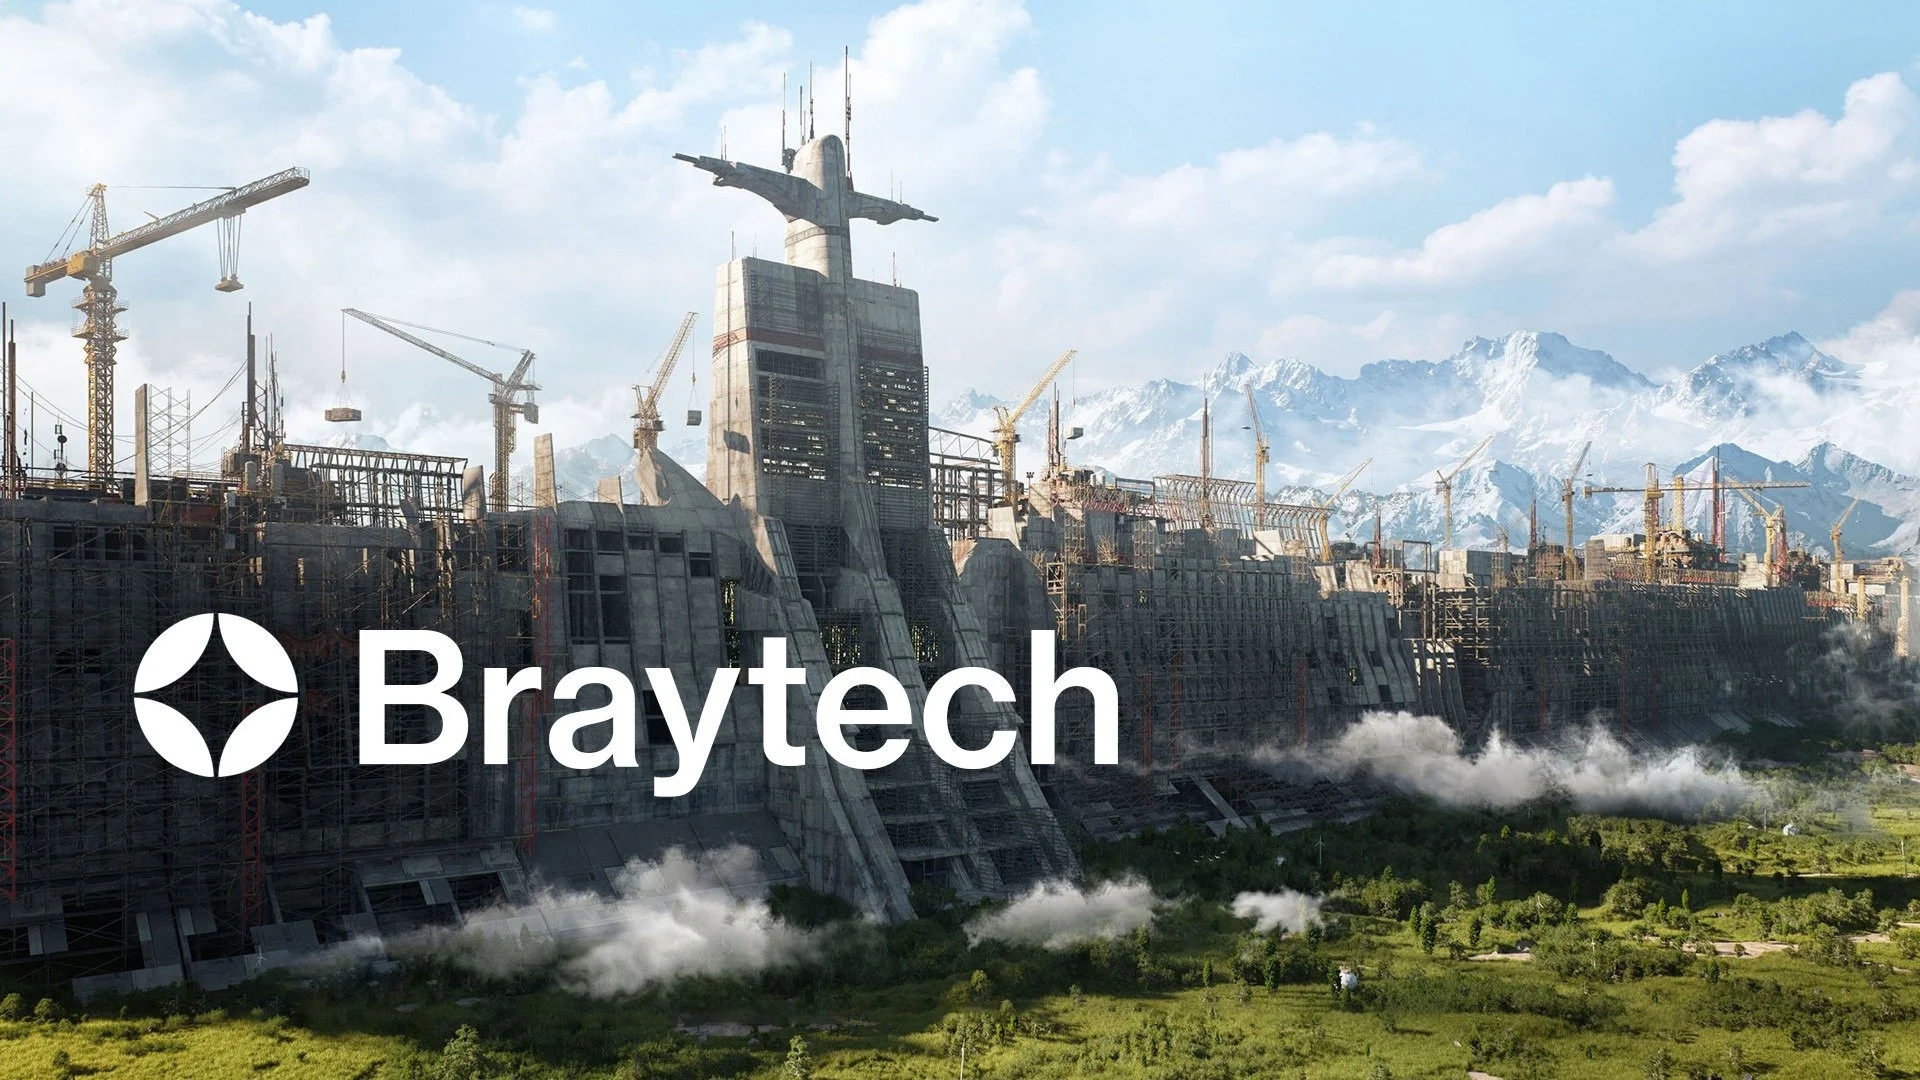 Braytech Org - Keep Track Of Your Destiny 2 Progress With It